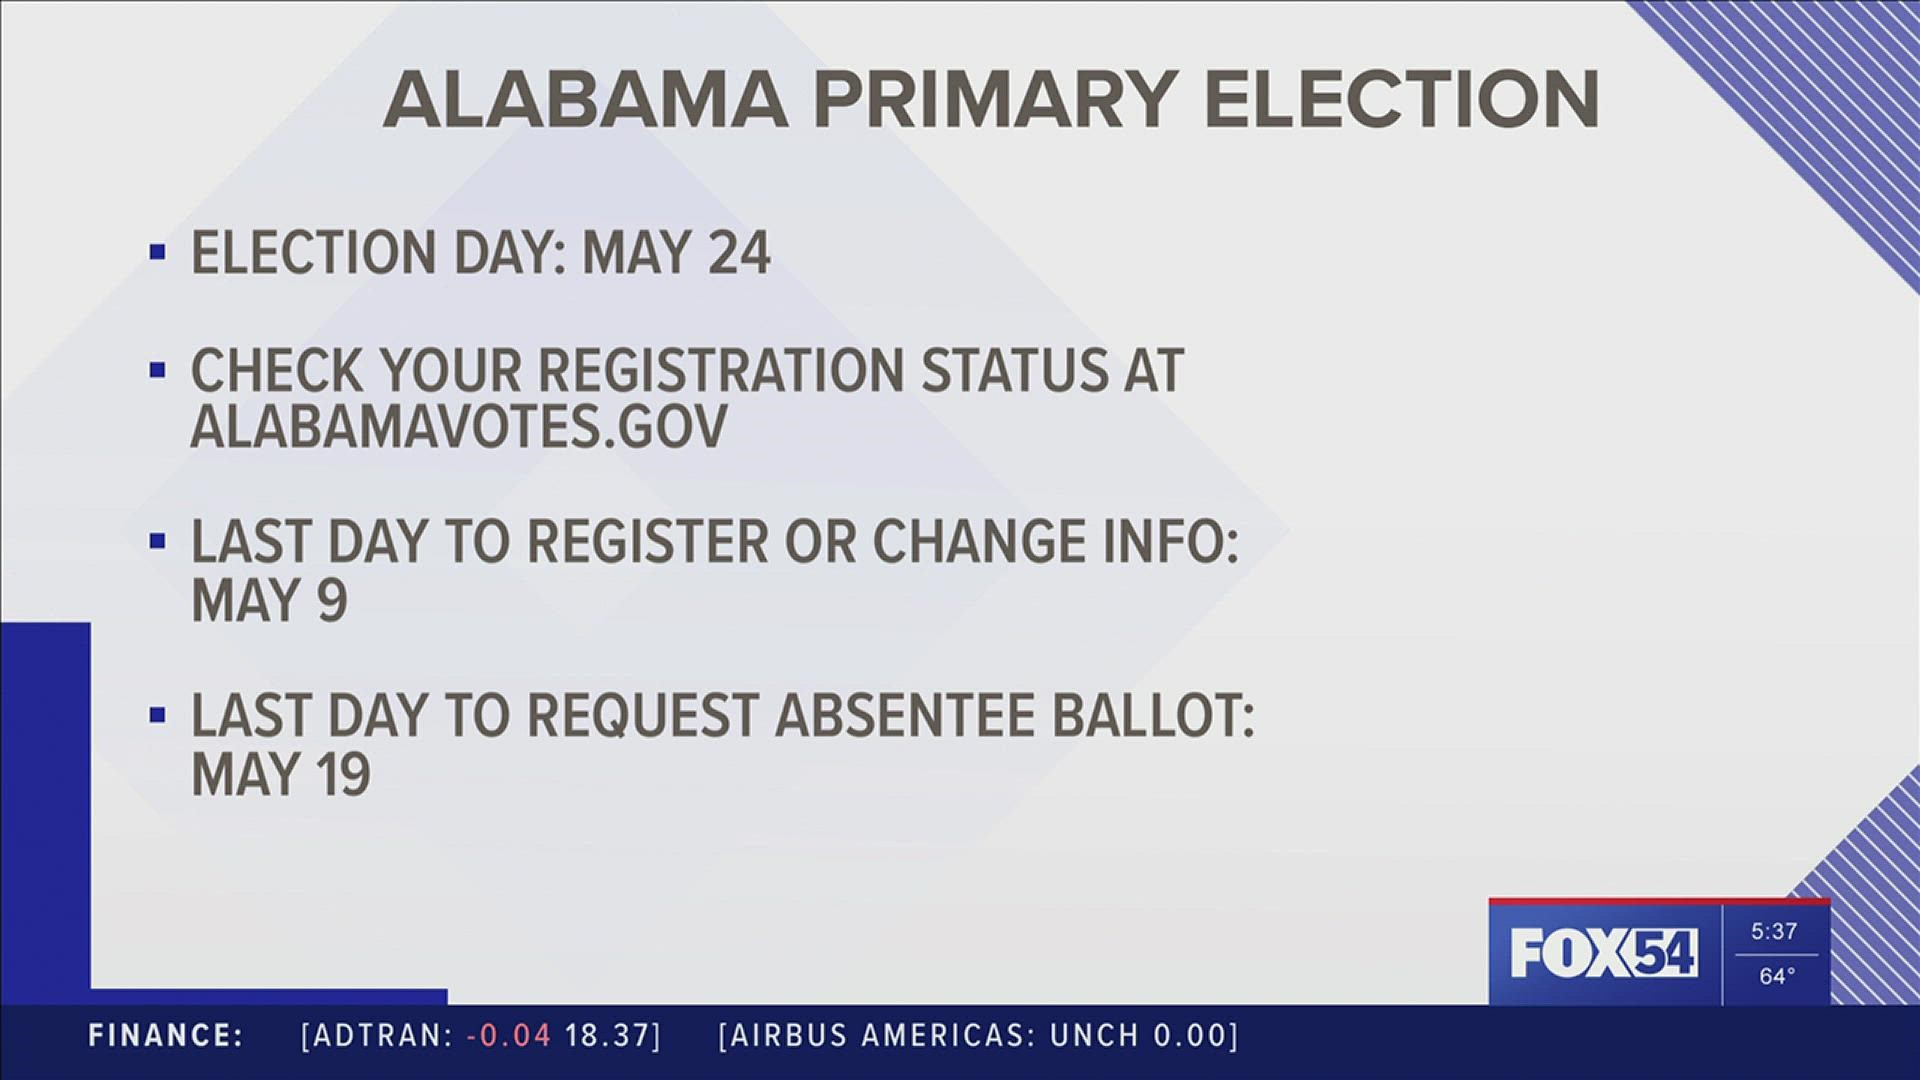 Alabama's primary election is on May 24th, but don't wait until the last minute to register or request an absentee ballot.